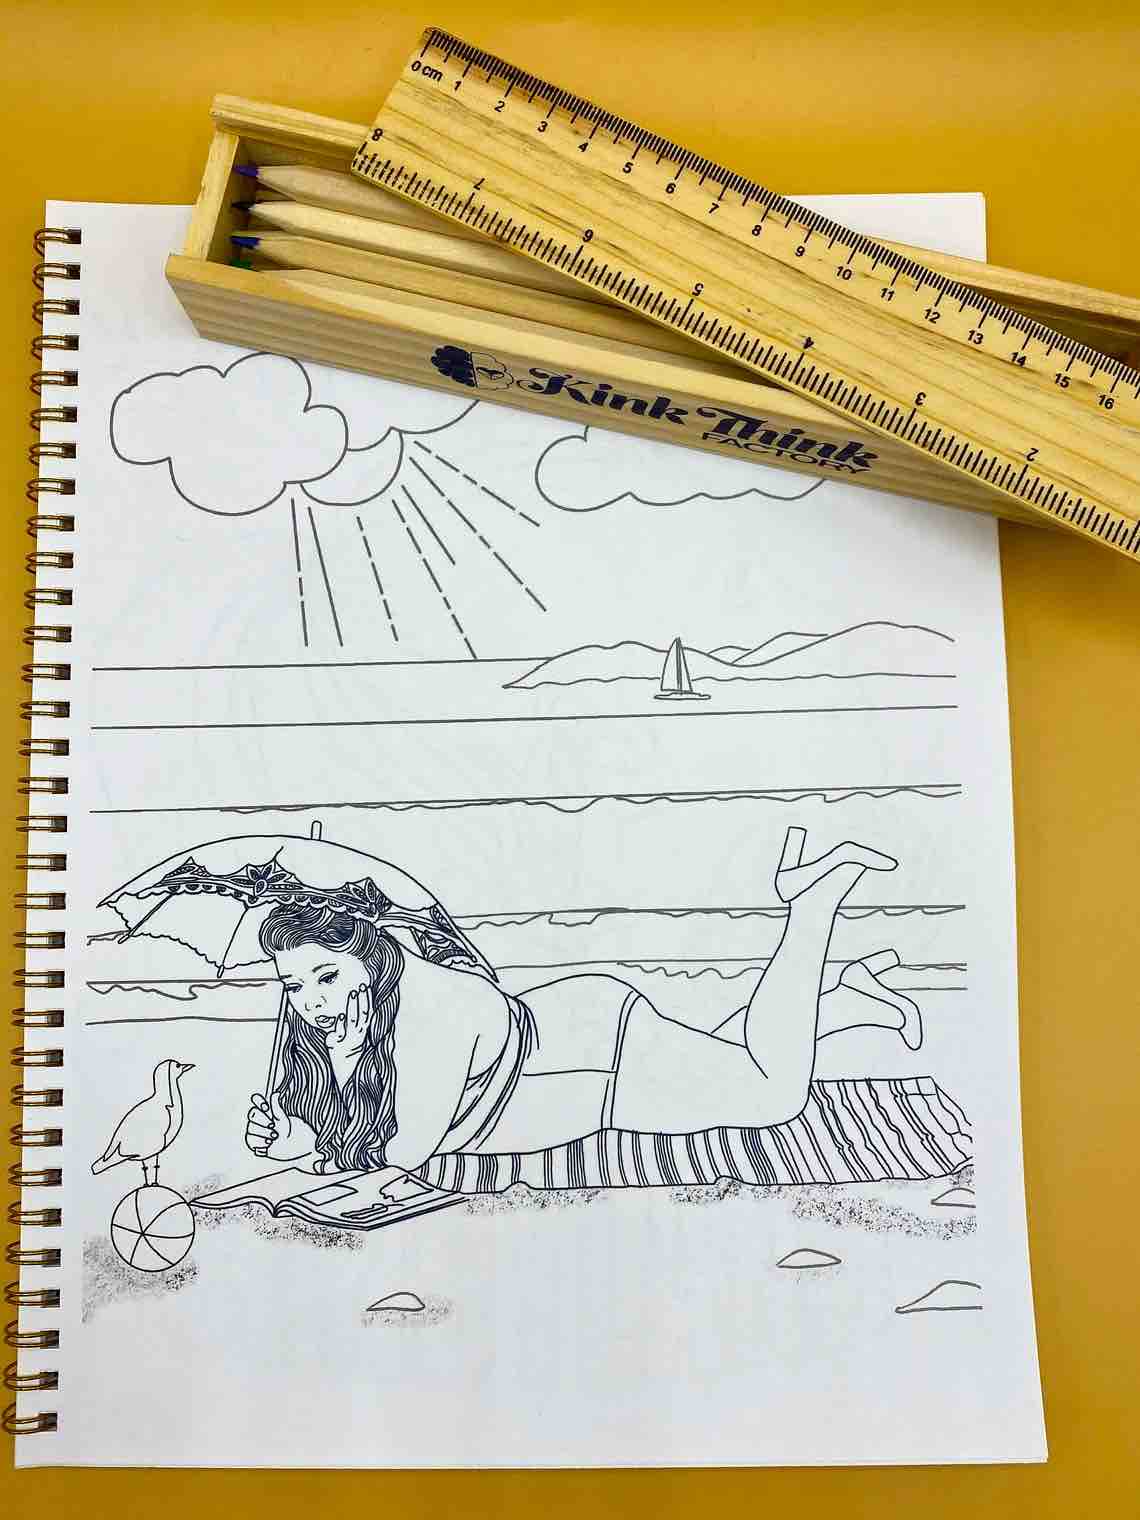 A page from Naughty and Nice: A Coloring Book for Babygirls: A plus size girl in a bathing suit holding a parasol lying on a striped towel on the beach.